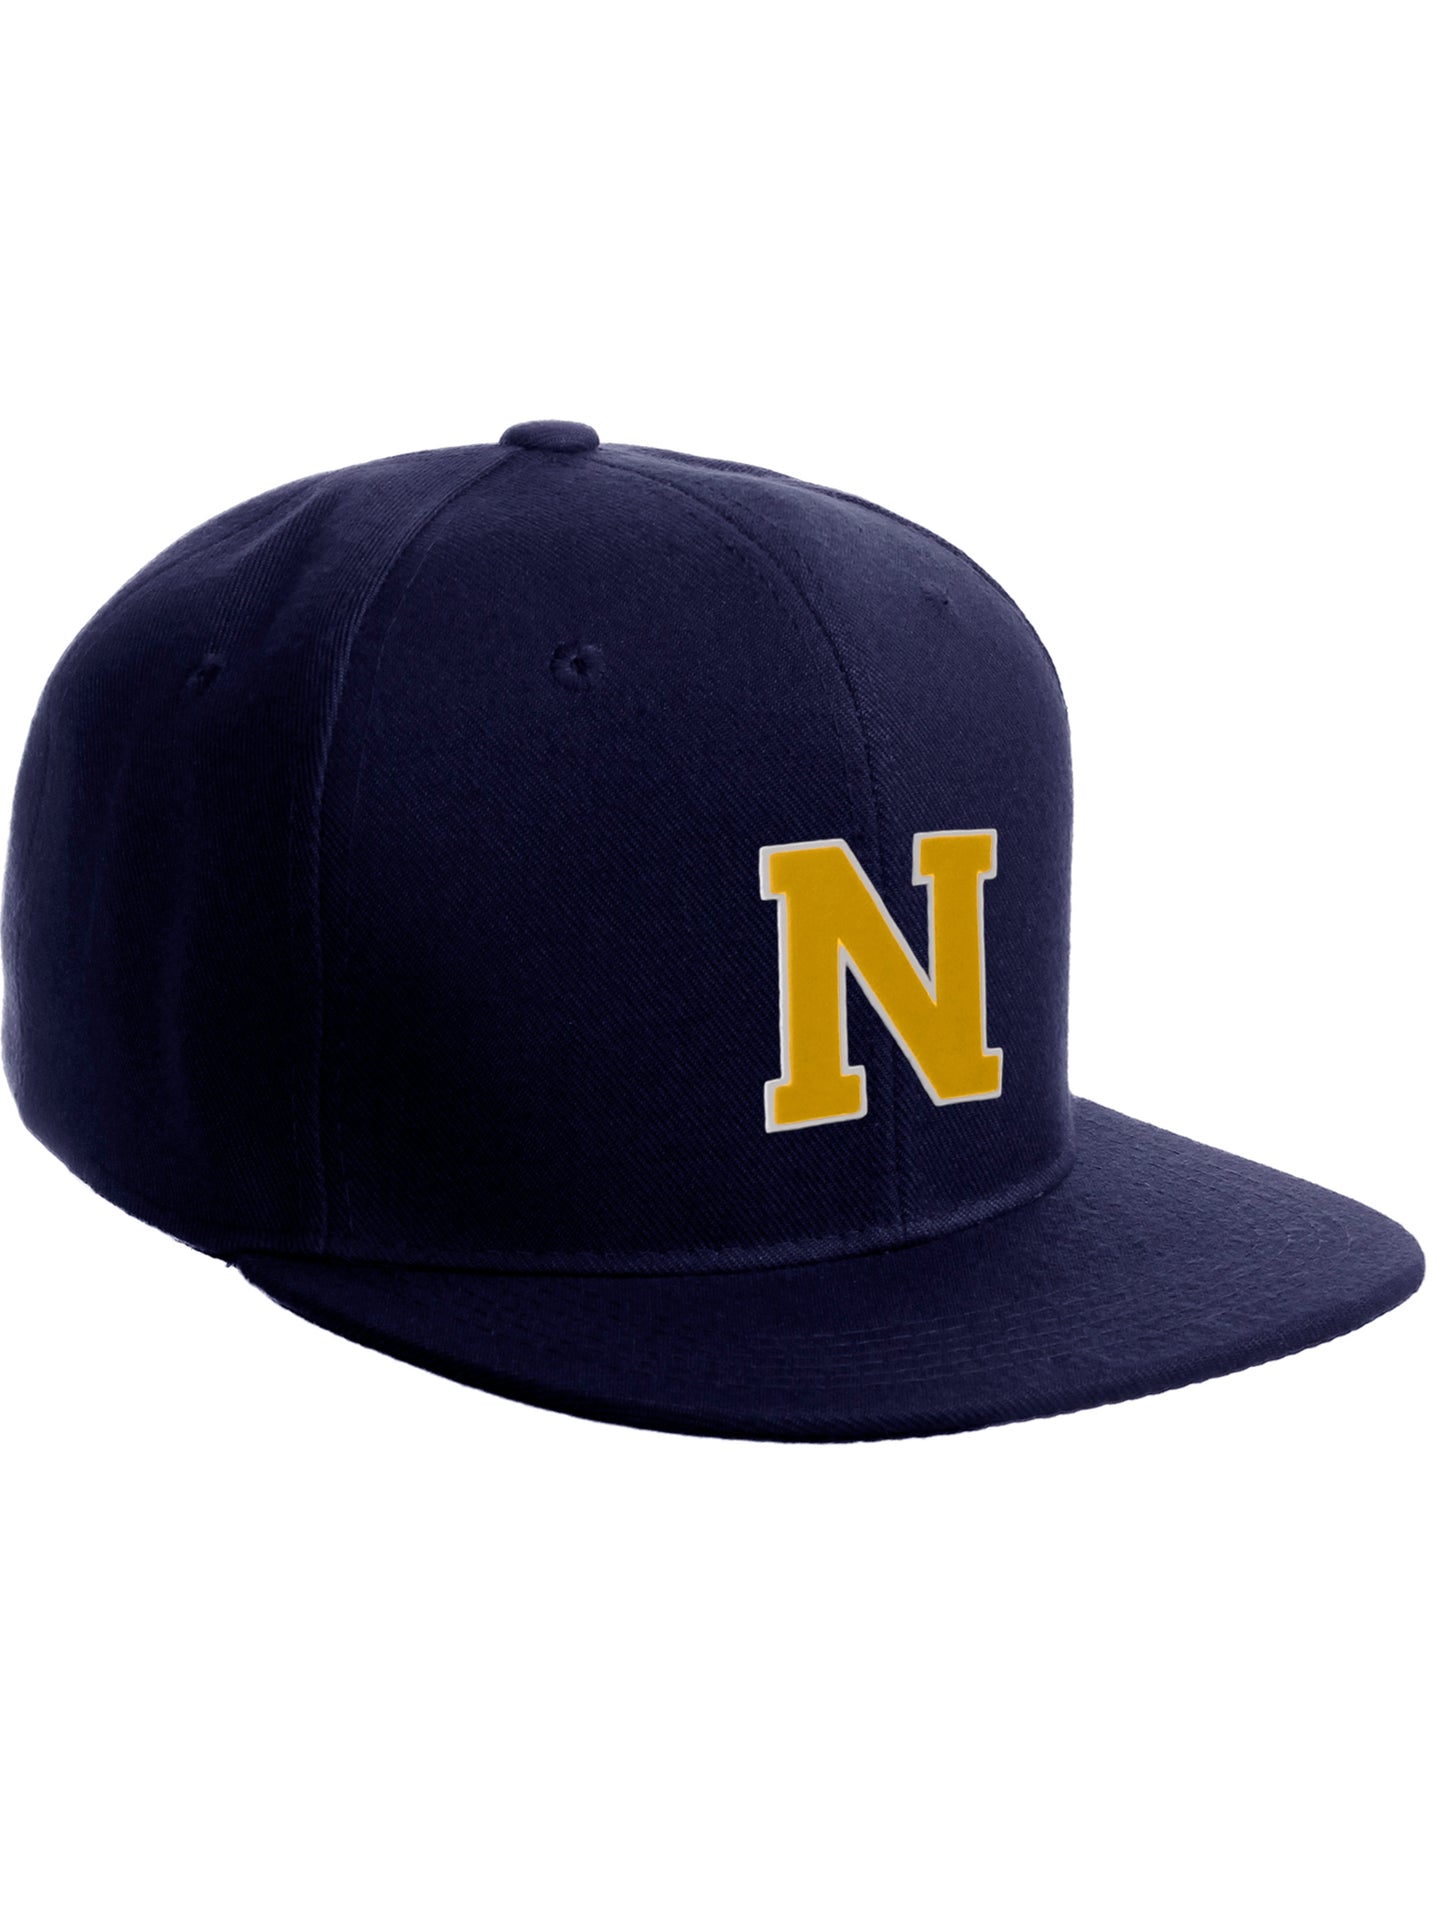 Classic Snapback Hat Custom A to Z Initial Letters, Navy Cap White Gold